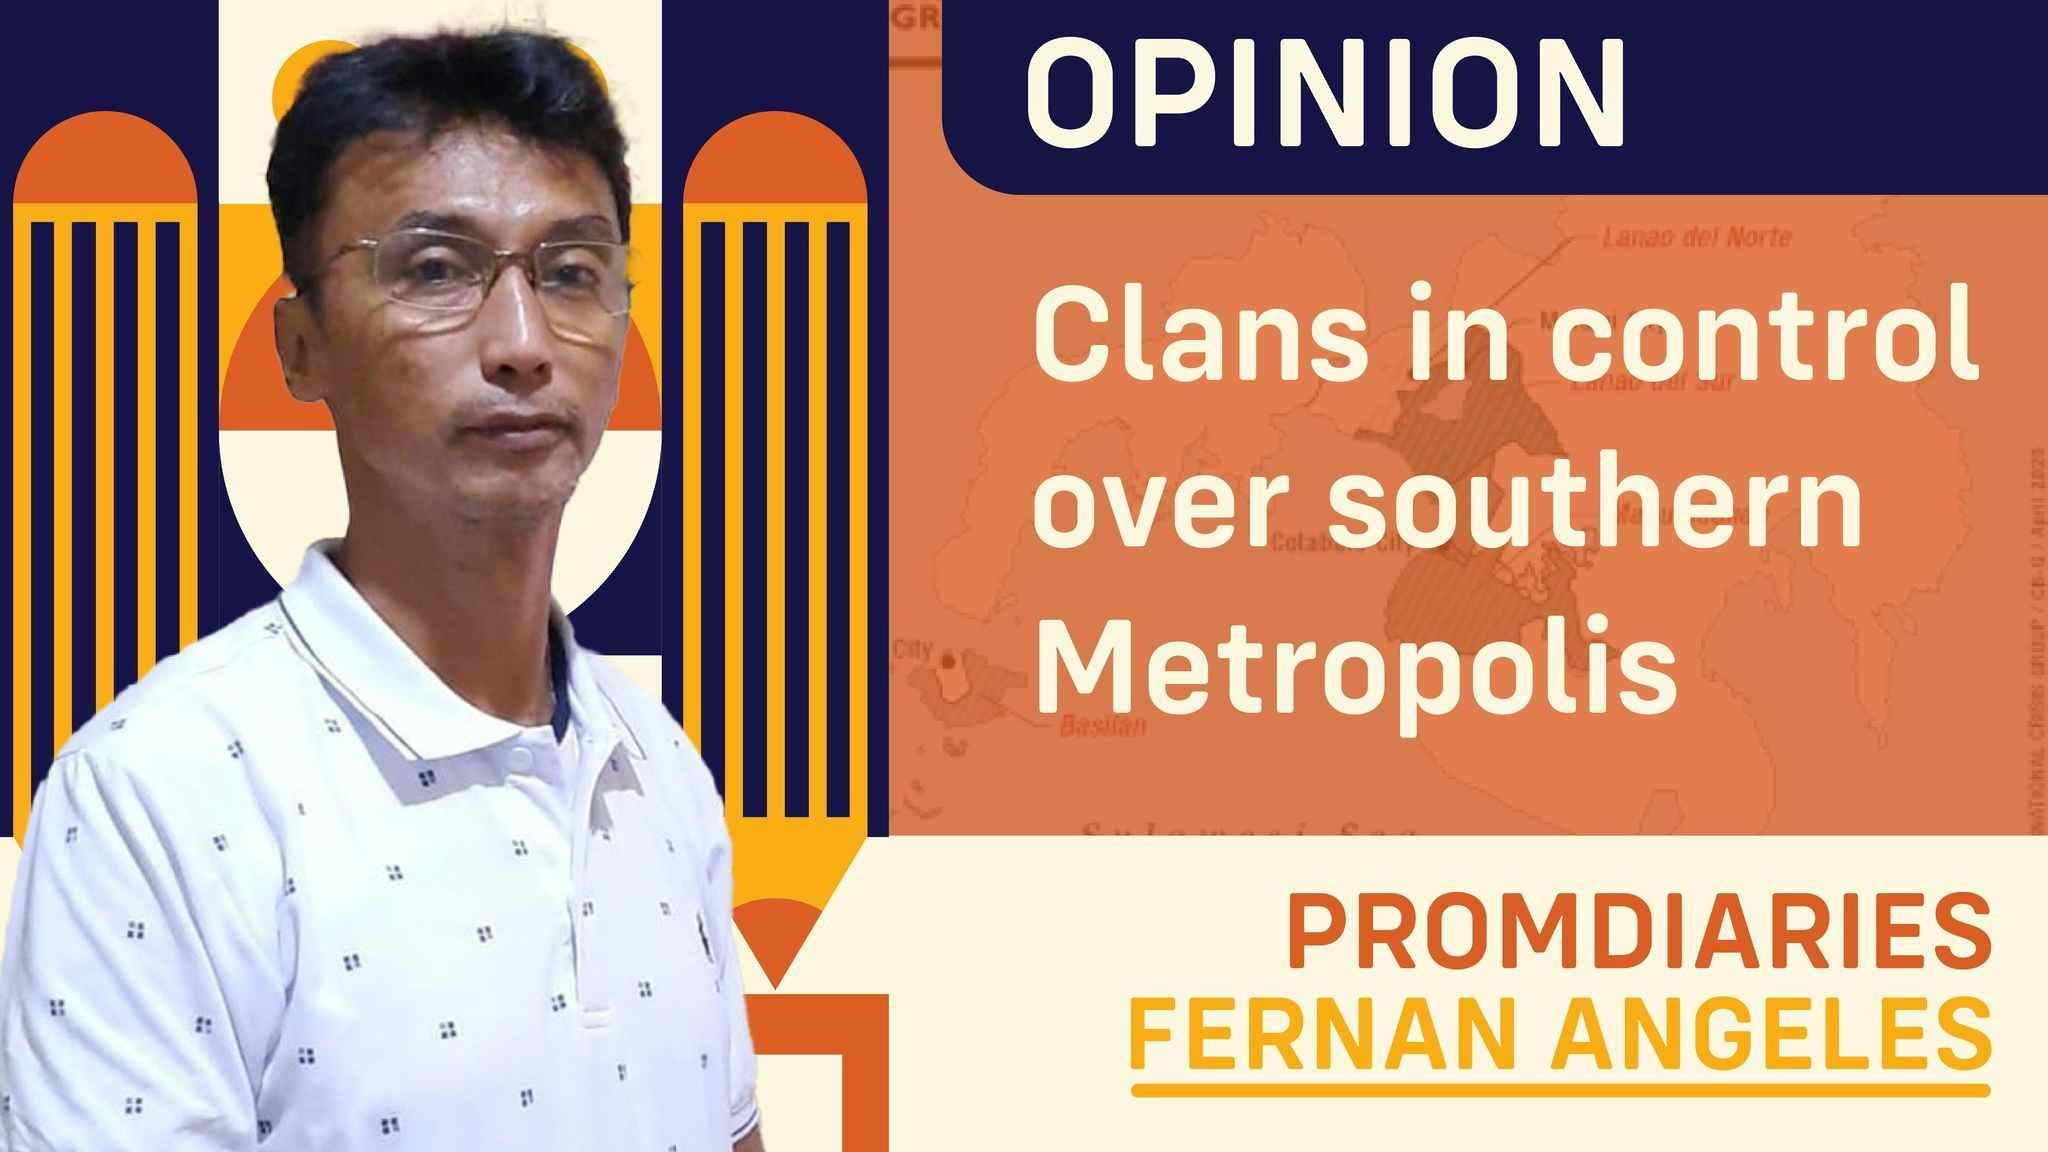 Clans in control over southern Metropolis